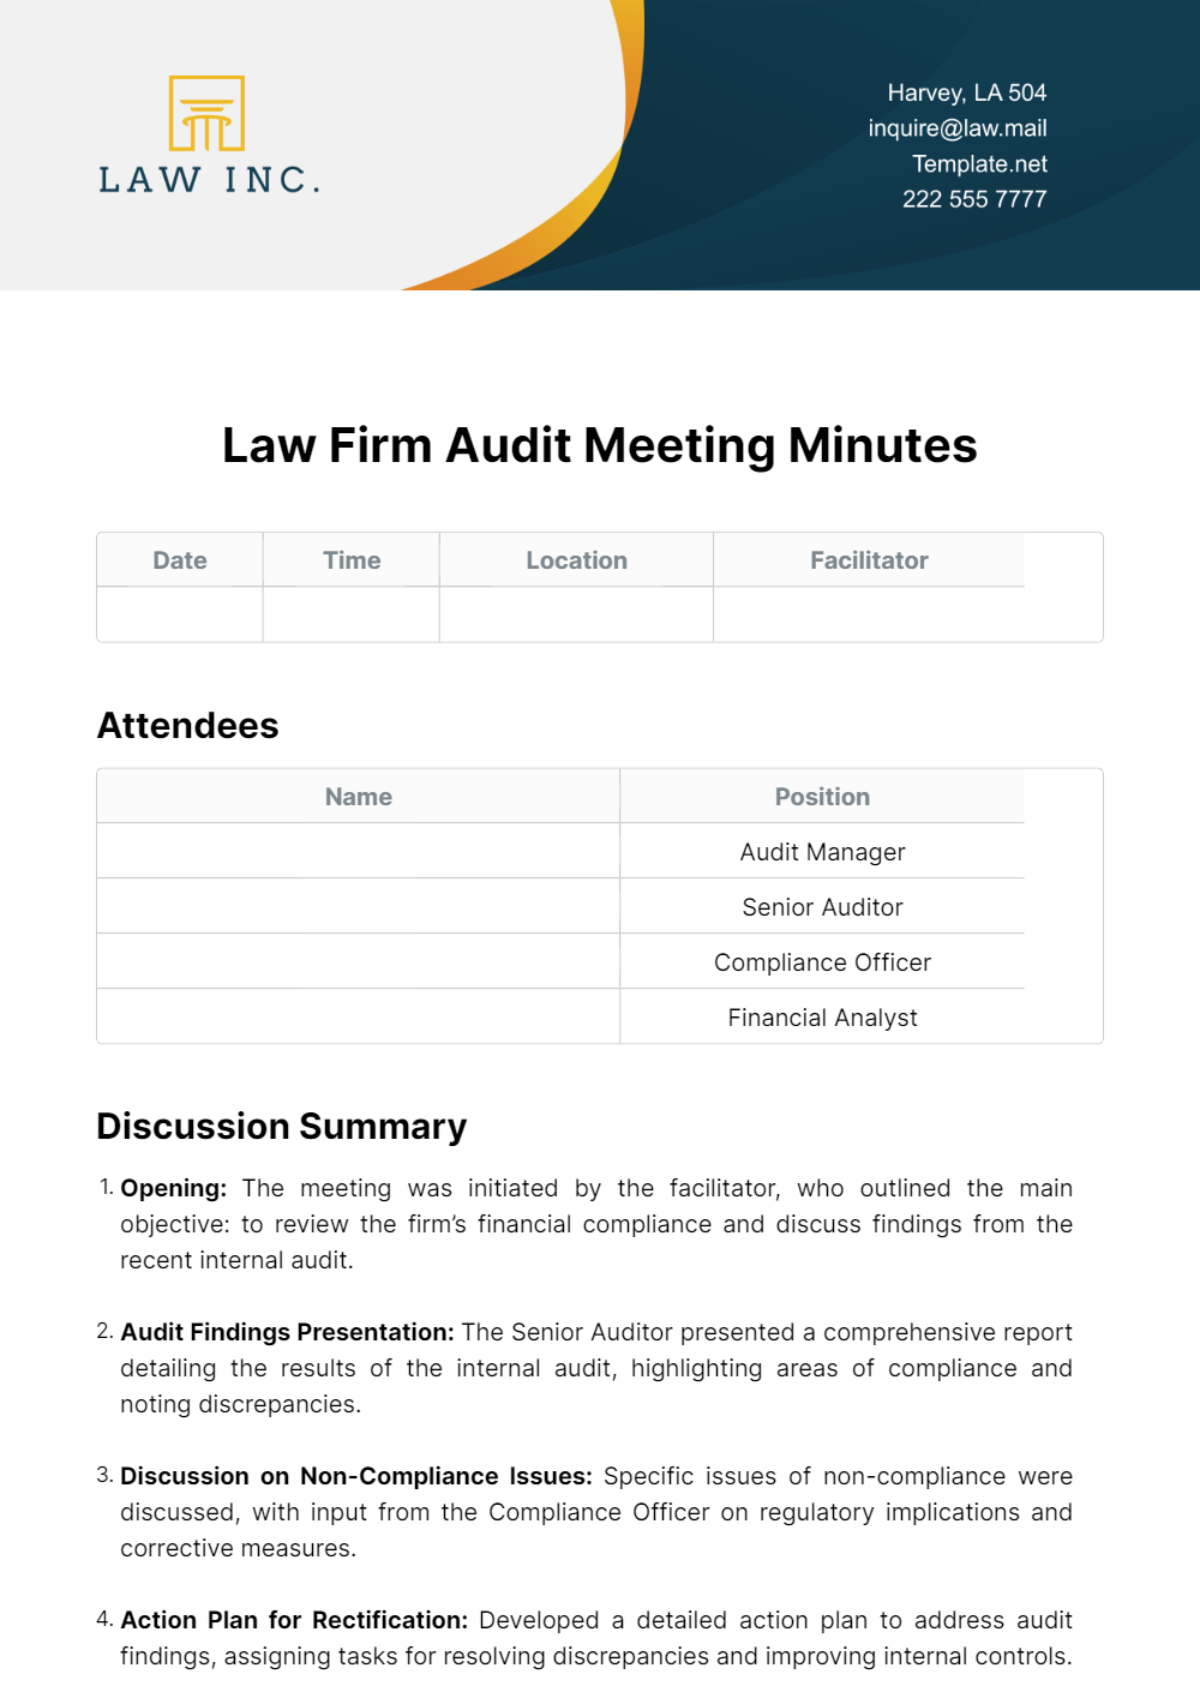 Free Law Firm Audit Meeting Minutes Template